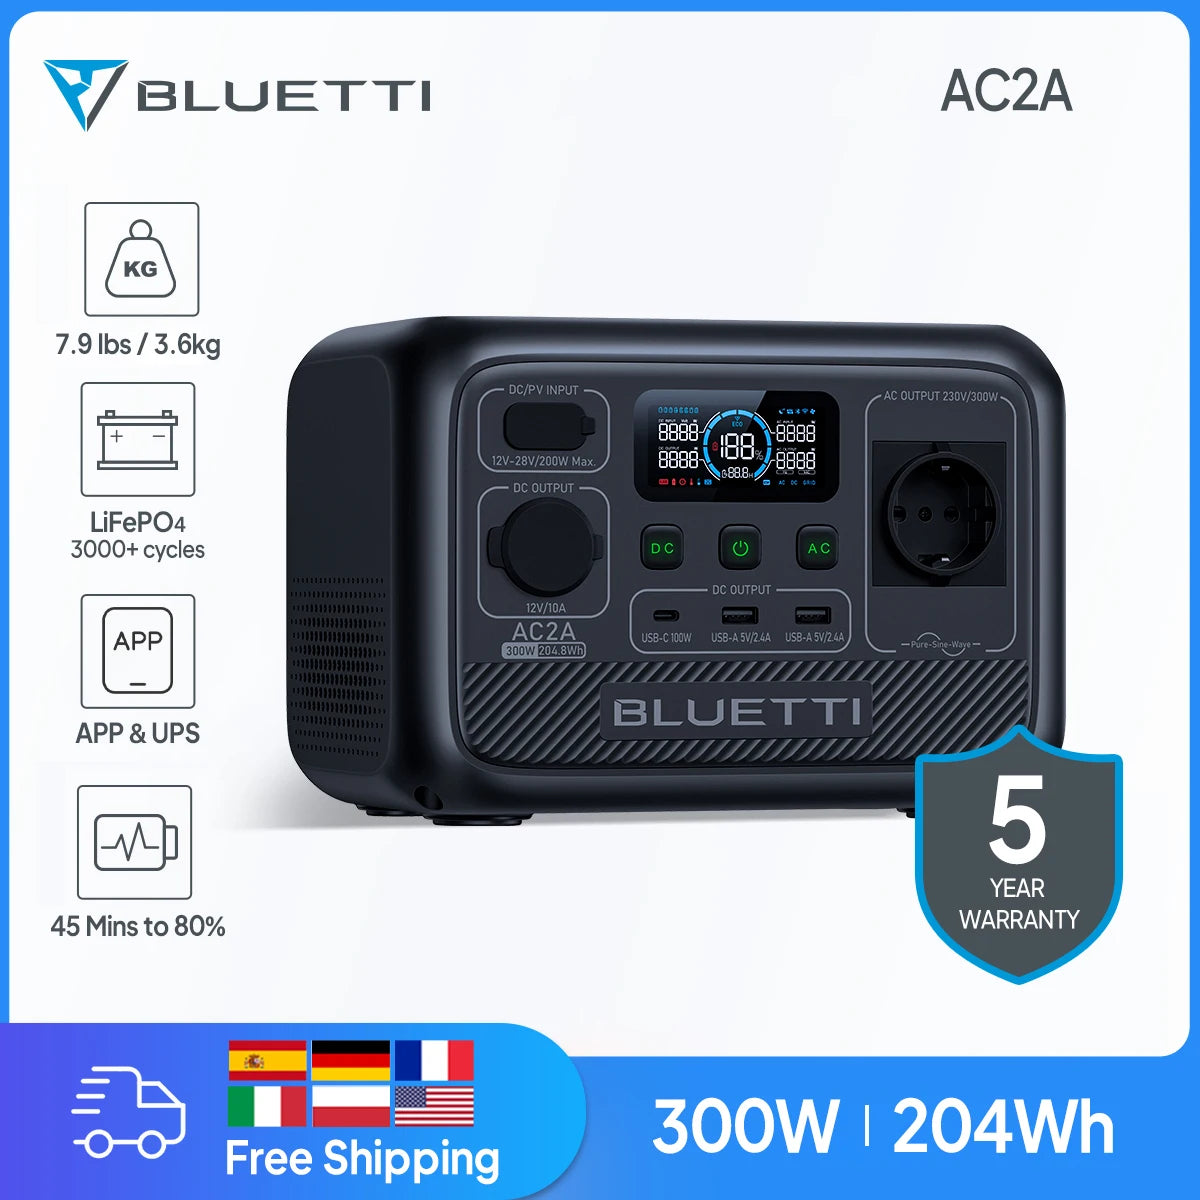 BLUETTI AC2A 300W 204Wh Portable Power Station LiFePO4 Battery Backup Solar Generator 3,000+ Charge Cycles App UPS Camping Life